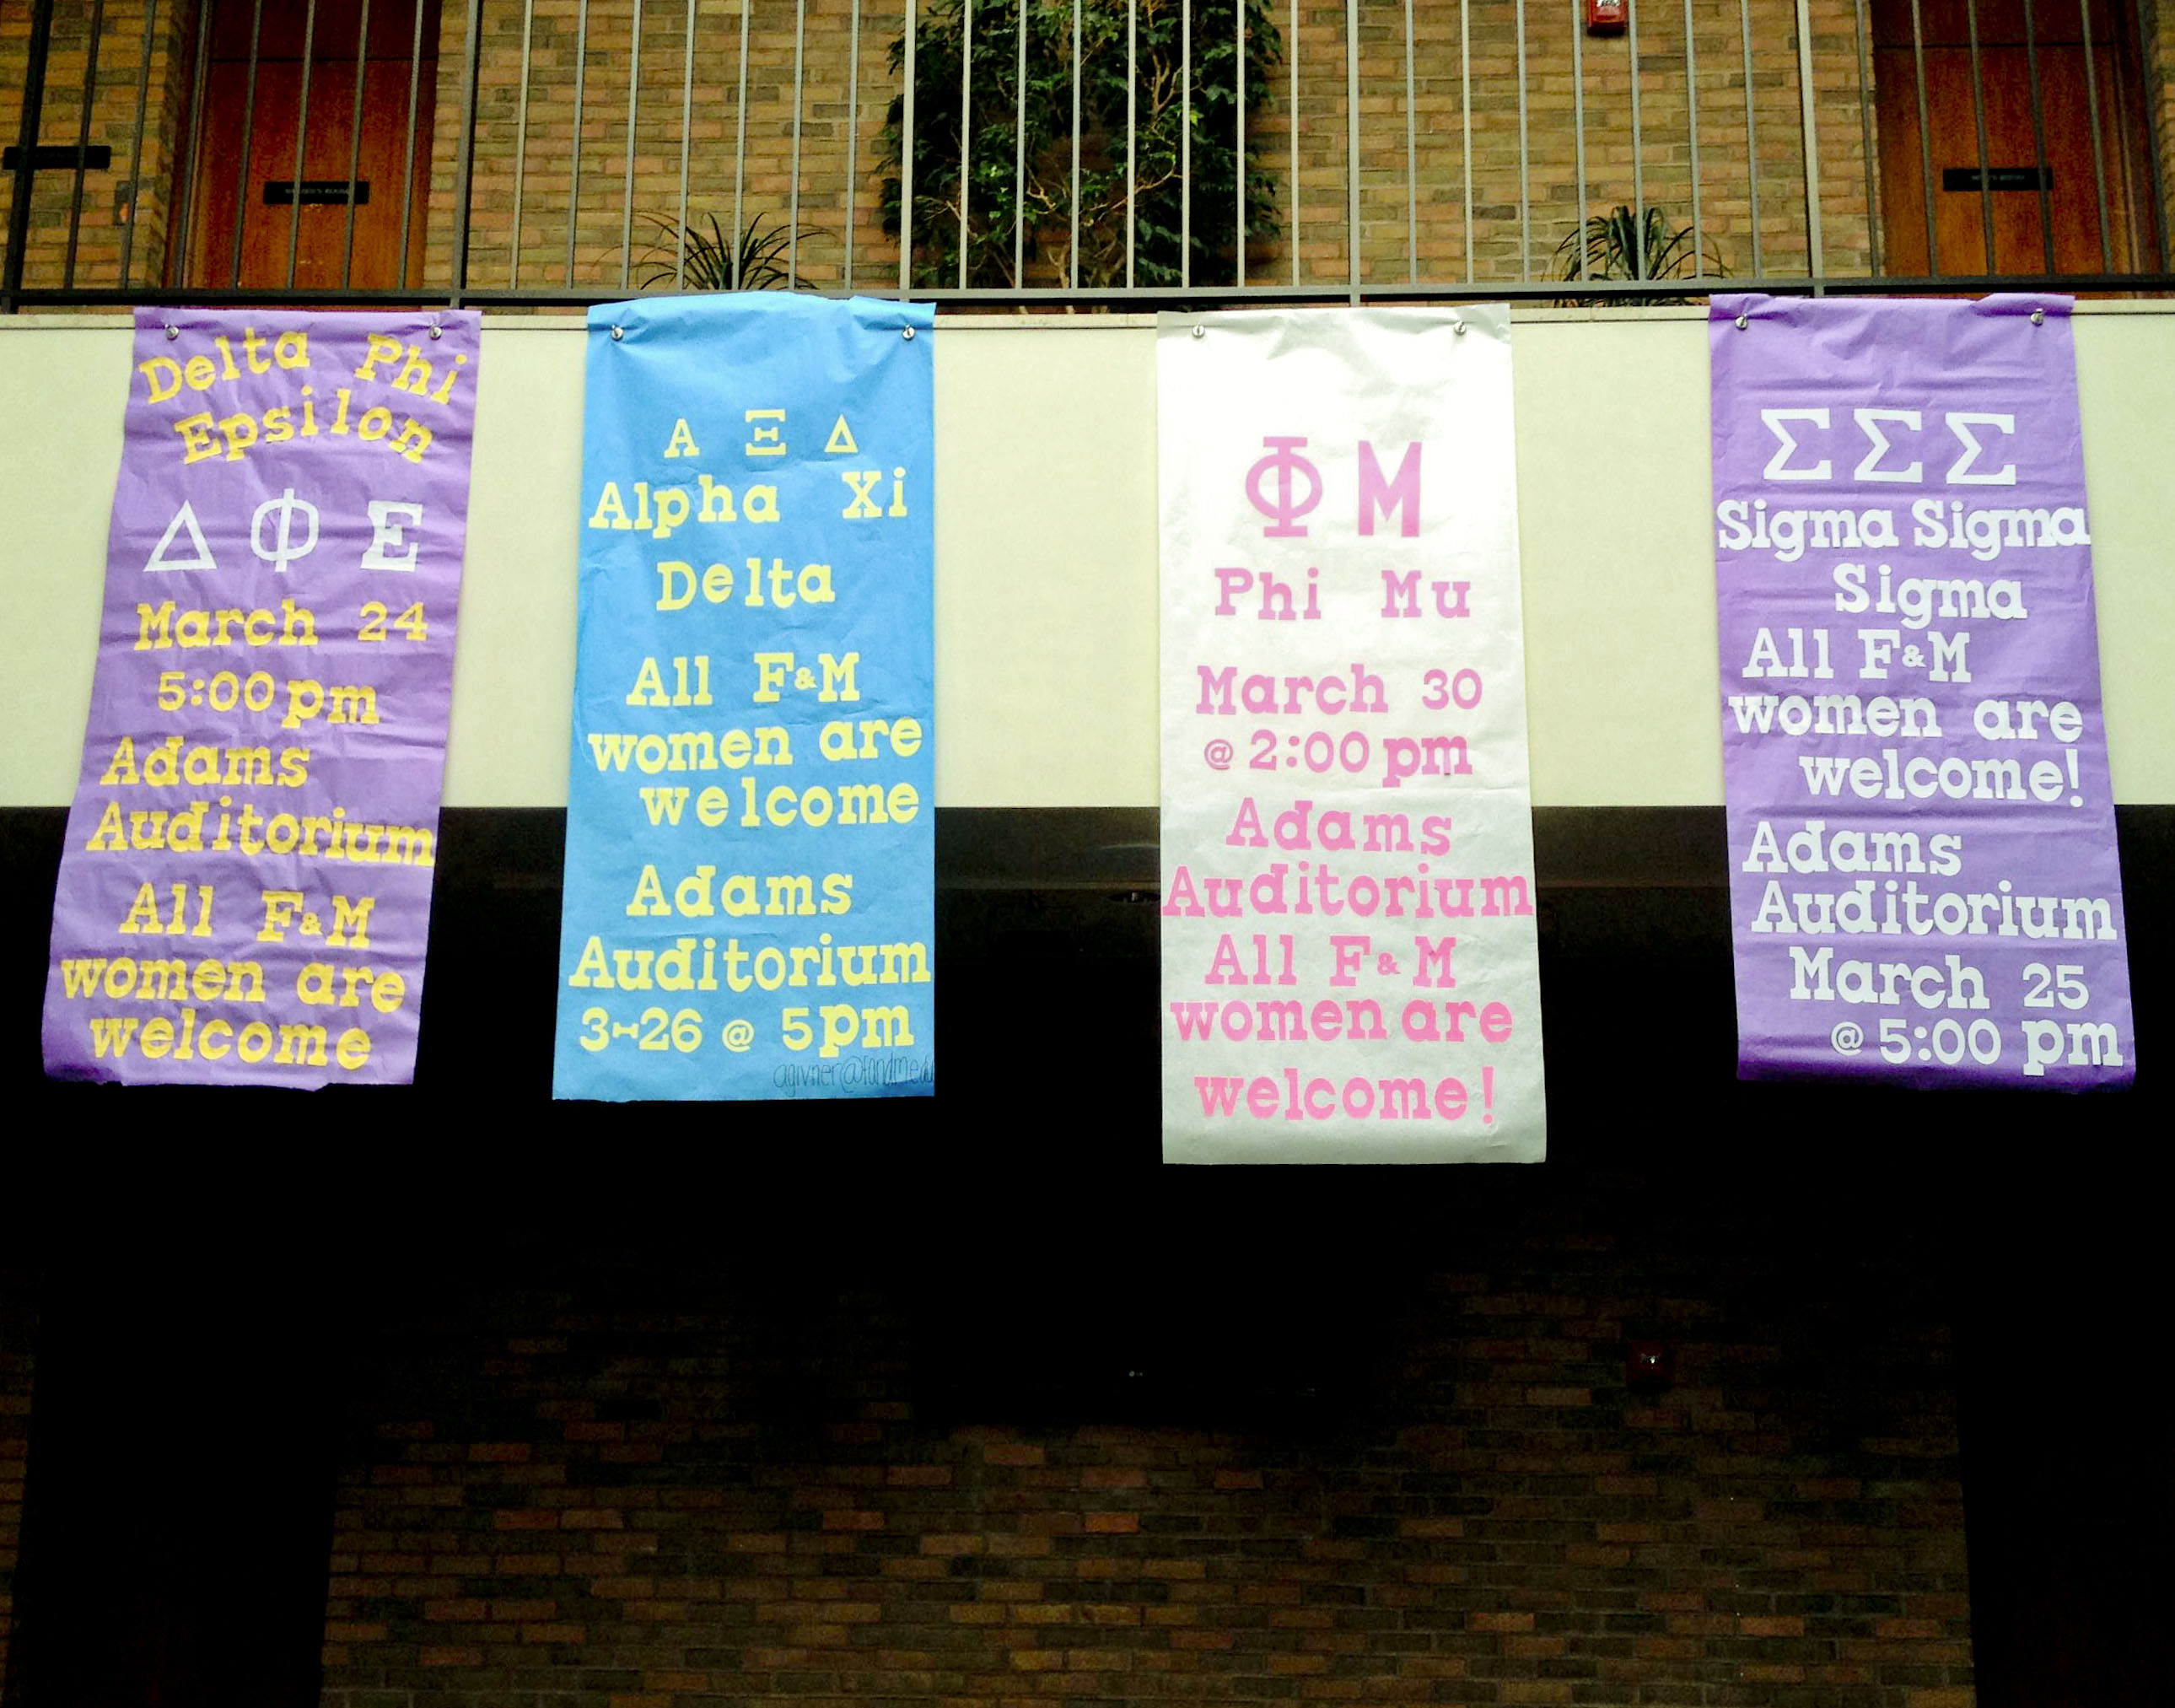 The Panhellenic Council’s Public Relations Committee, during extension, hung banners in the Steinman College Center, promoting them to students. Photo by Scott Onigman '15